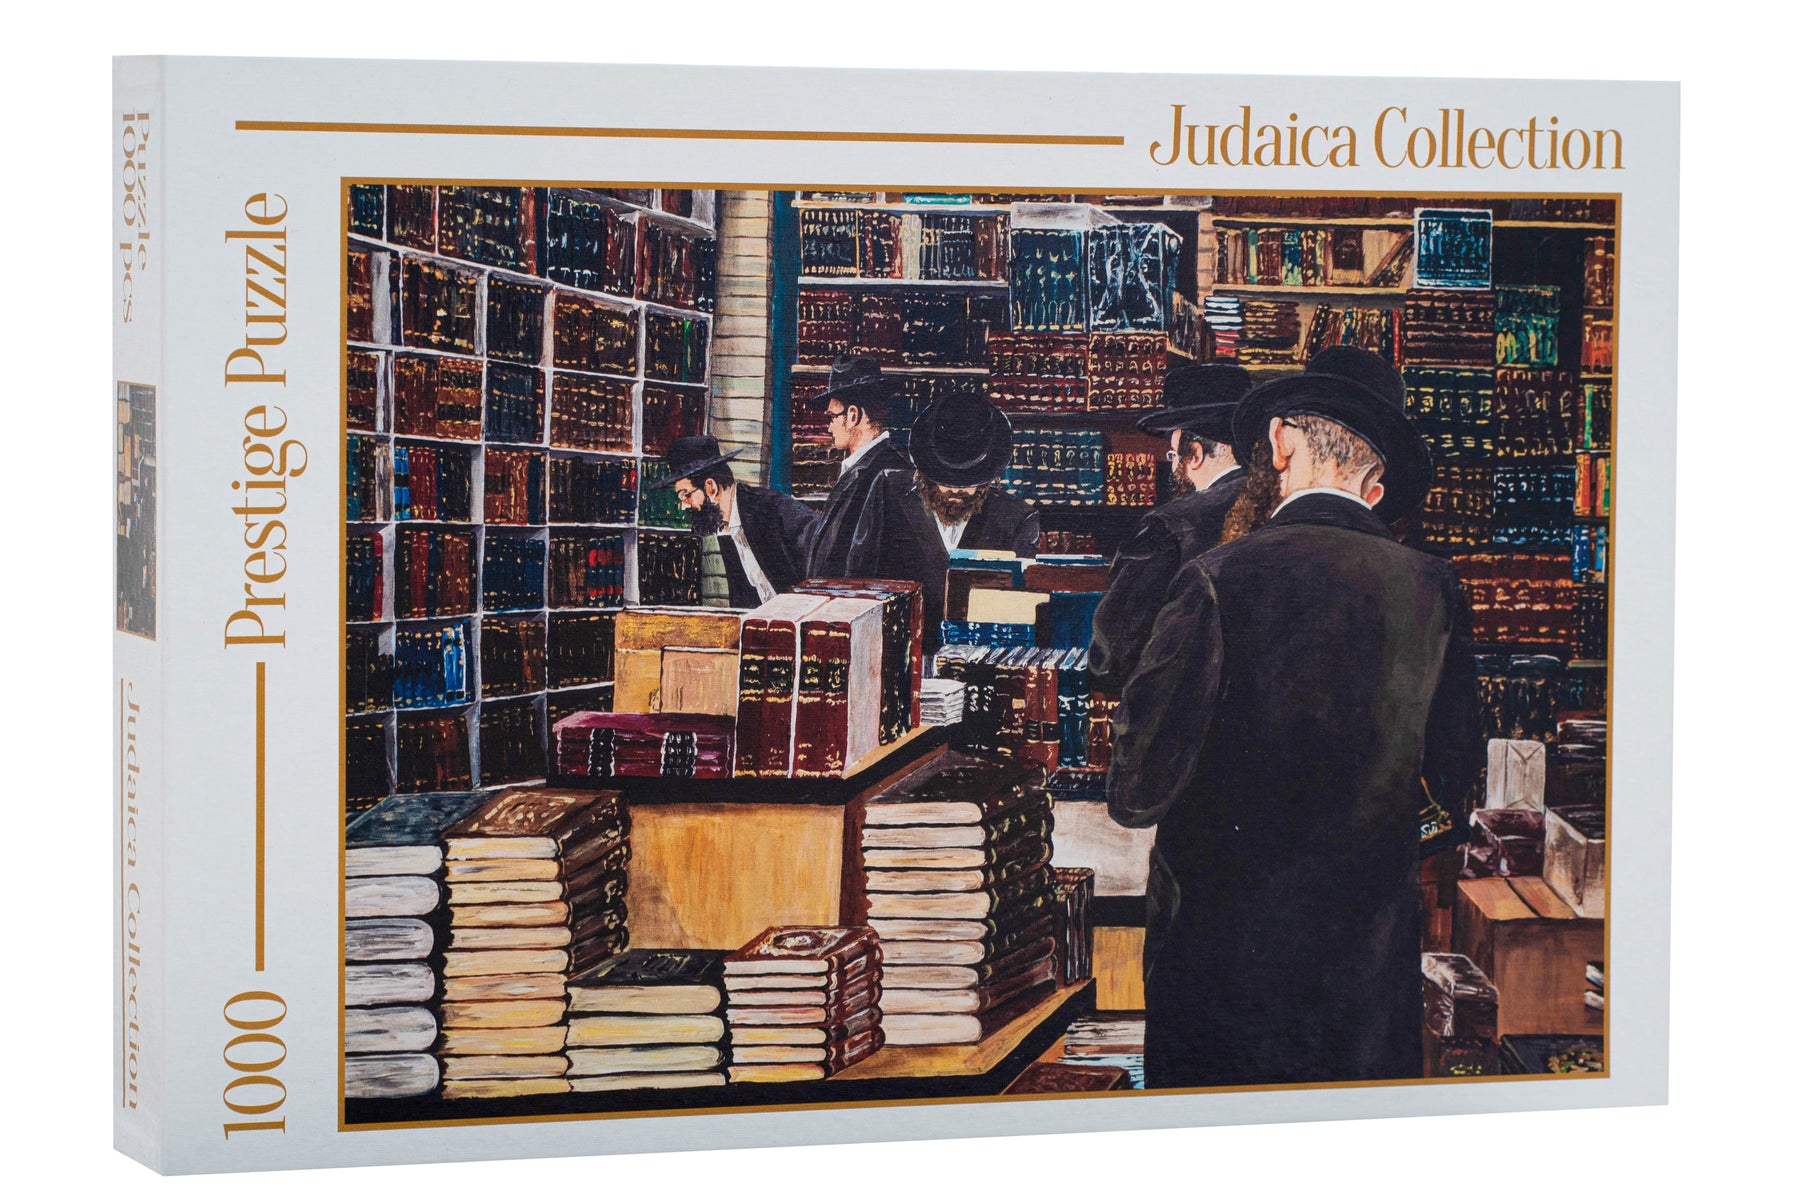 The most exciting catalog of jigsaw puzzles collections!